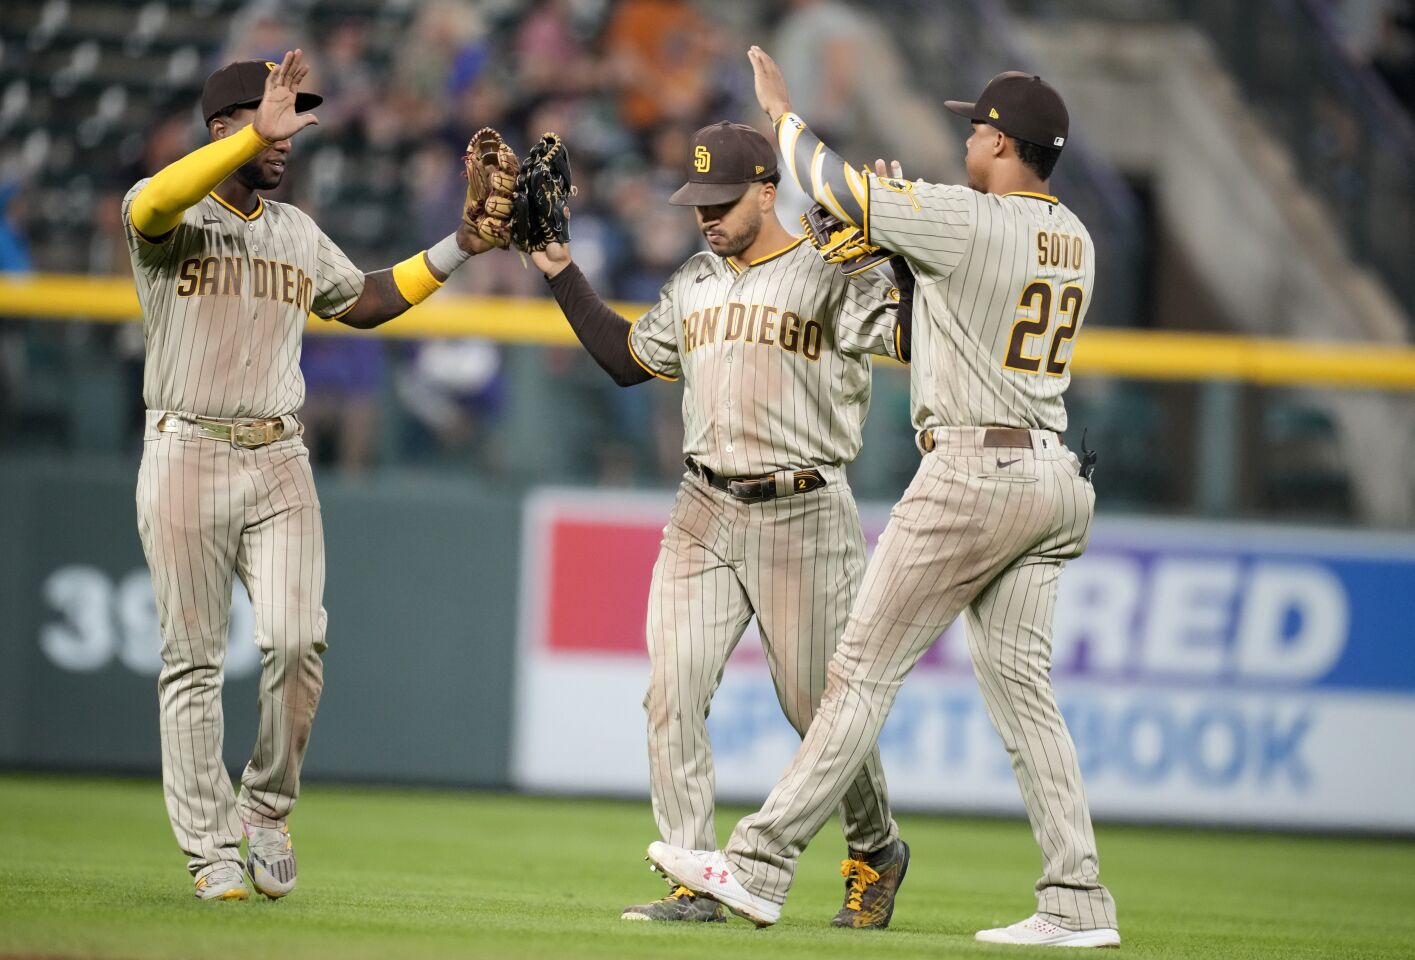 San Diego Padres (85-68, 2nd in NL West)The Padres enter the week with their Magic Number sitting at six. They’ve built a 1½-game lead on the No. 6 Phillies and a three-game lead on the Brewers, who would miss the playoffs if the season ended today. The Padres have been outscored 100-41 in losing 12 of 16 so far to the Dodgers.